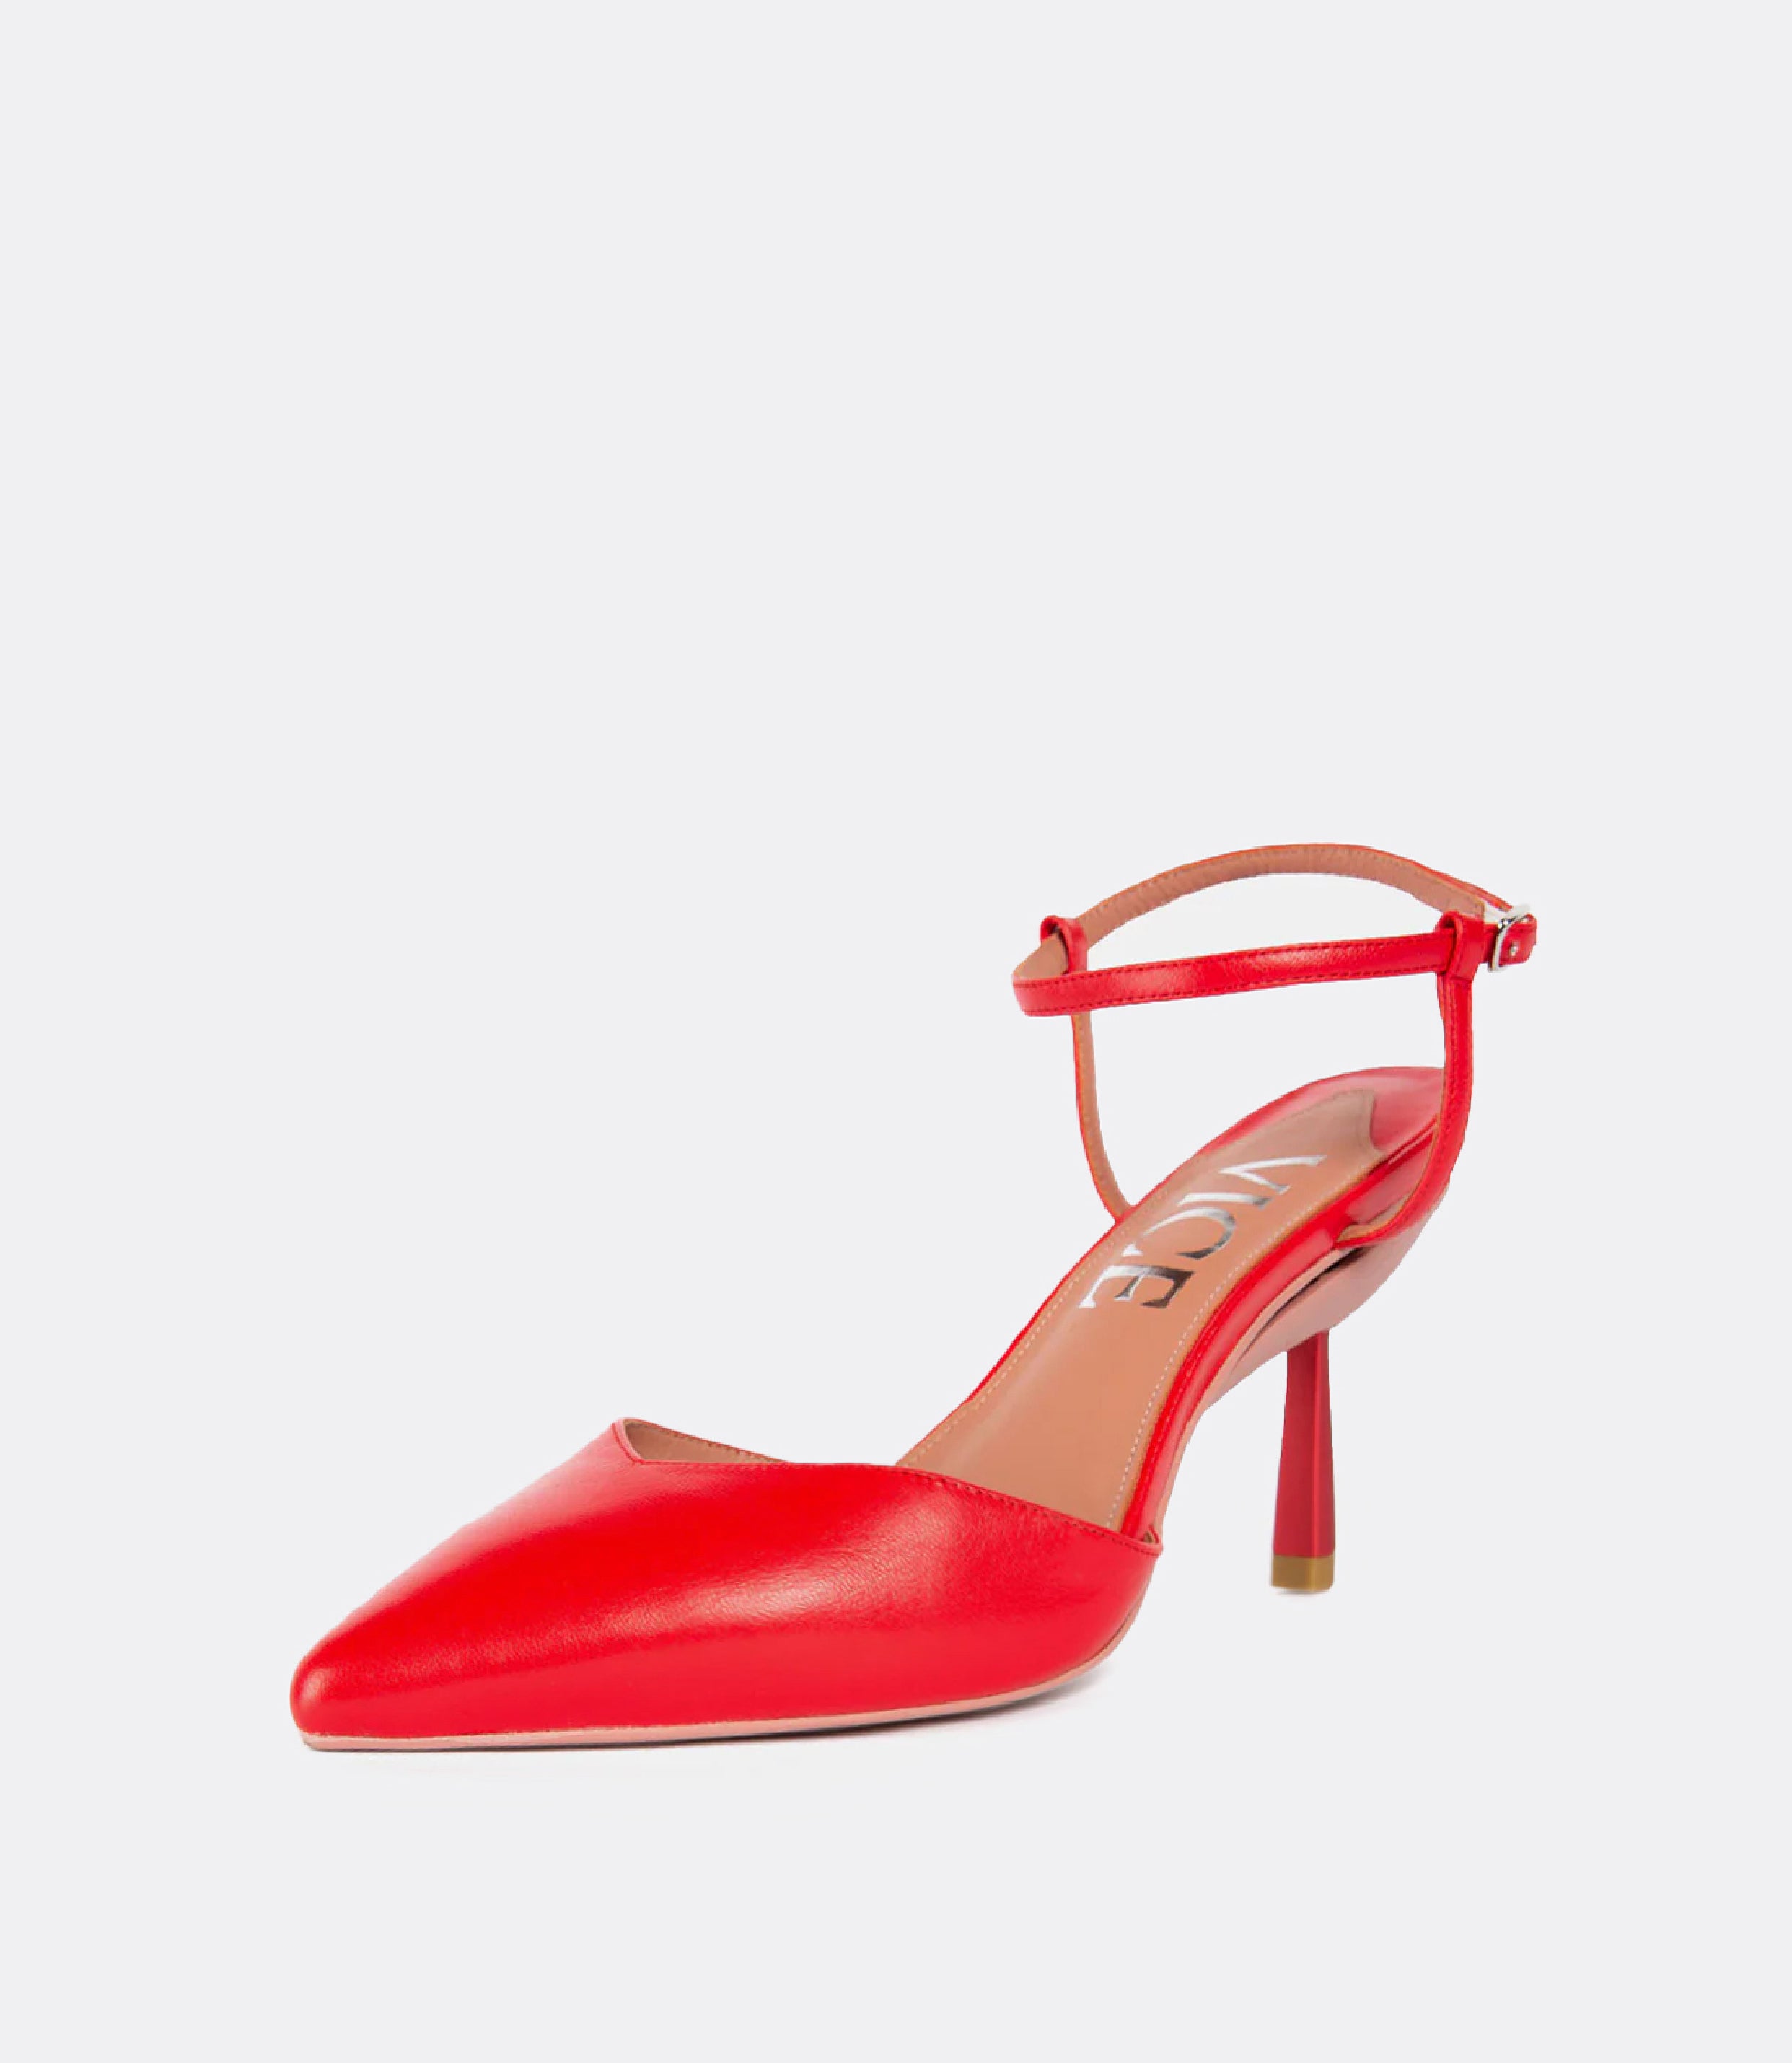 Front view of red ankle strap pumps.